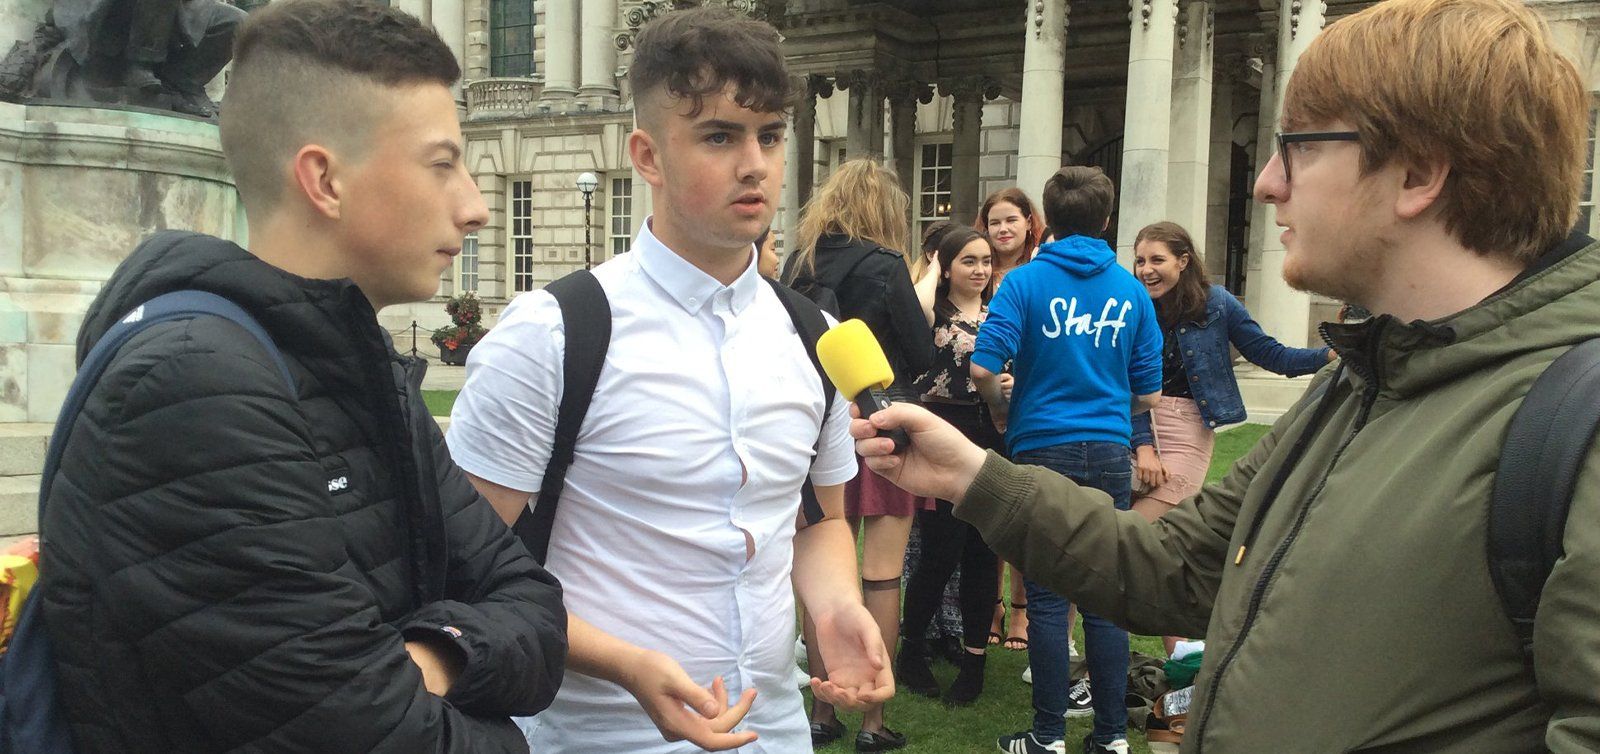 Sean interviewing young people